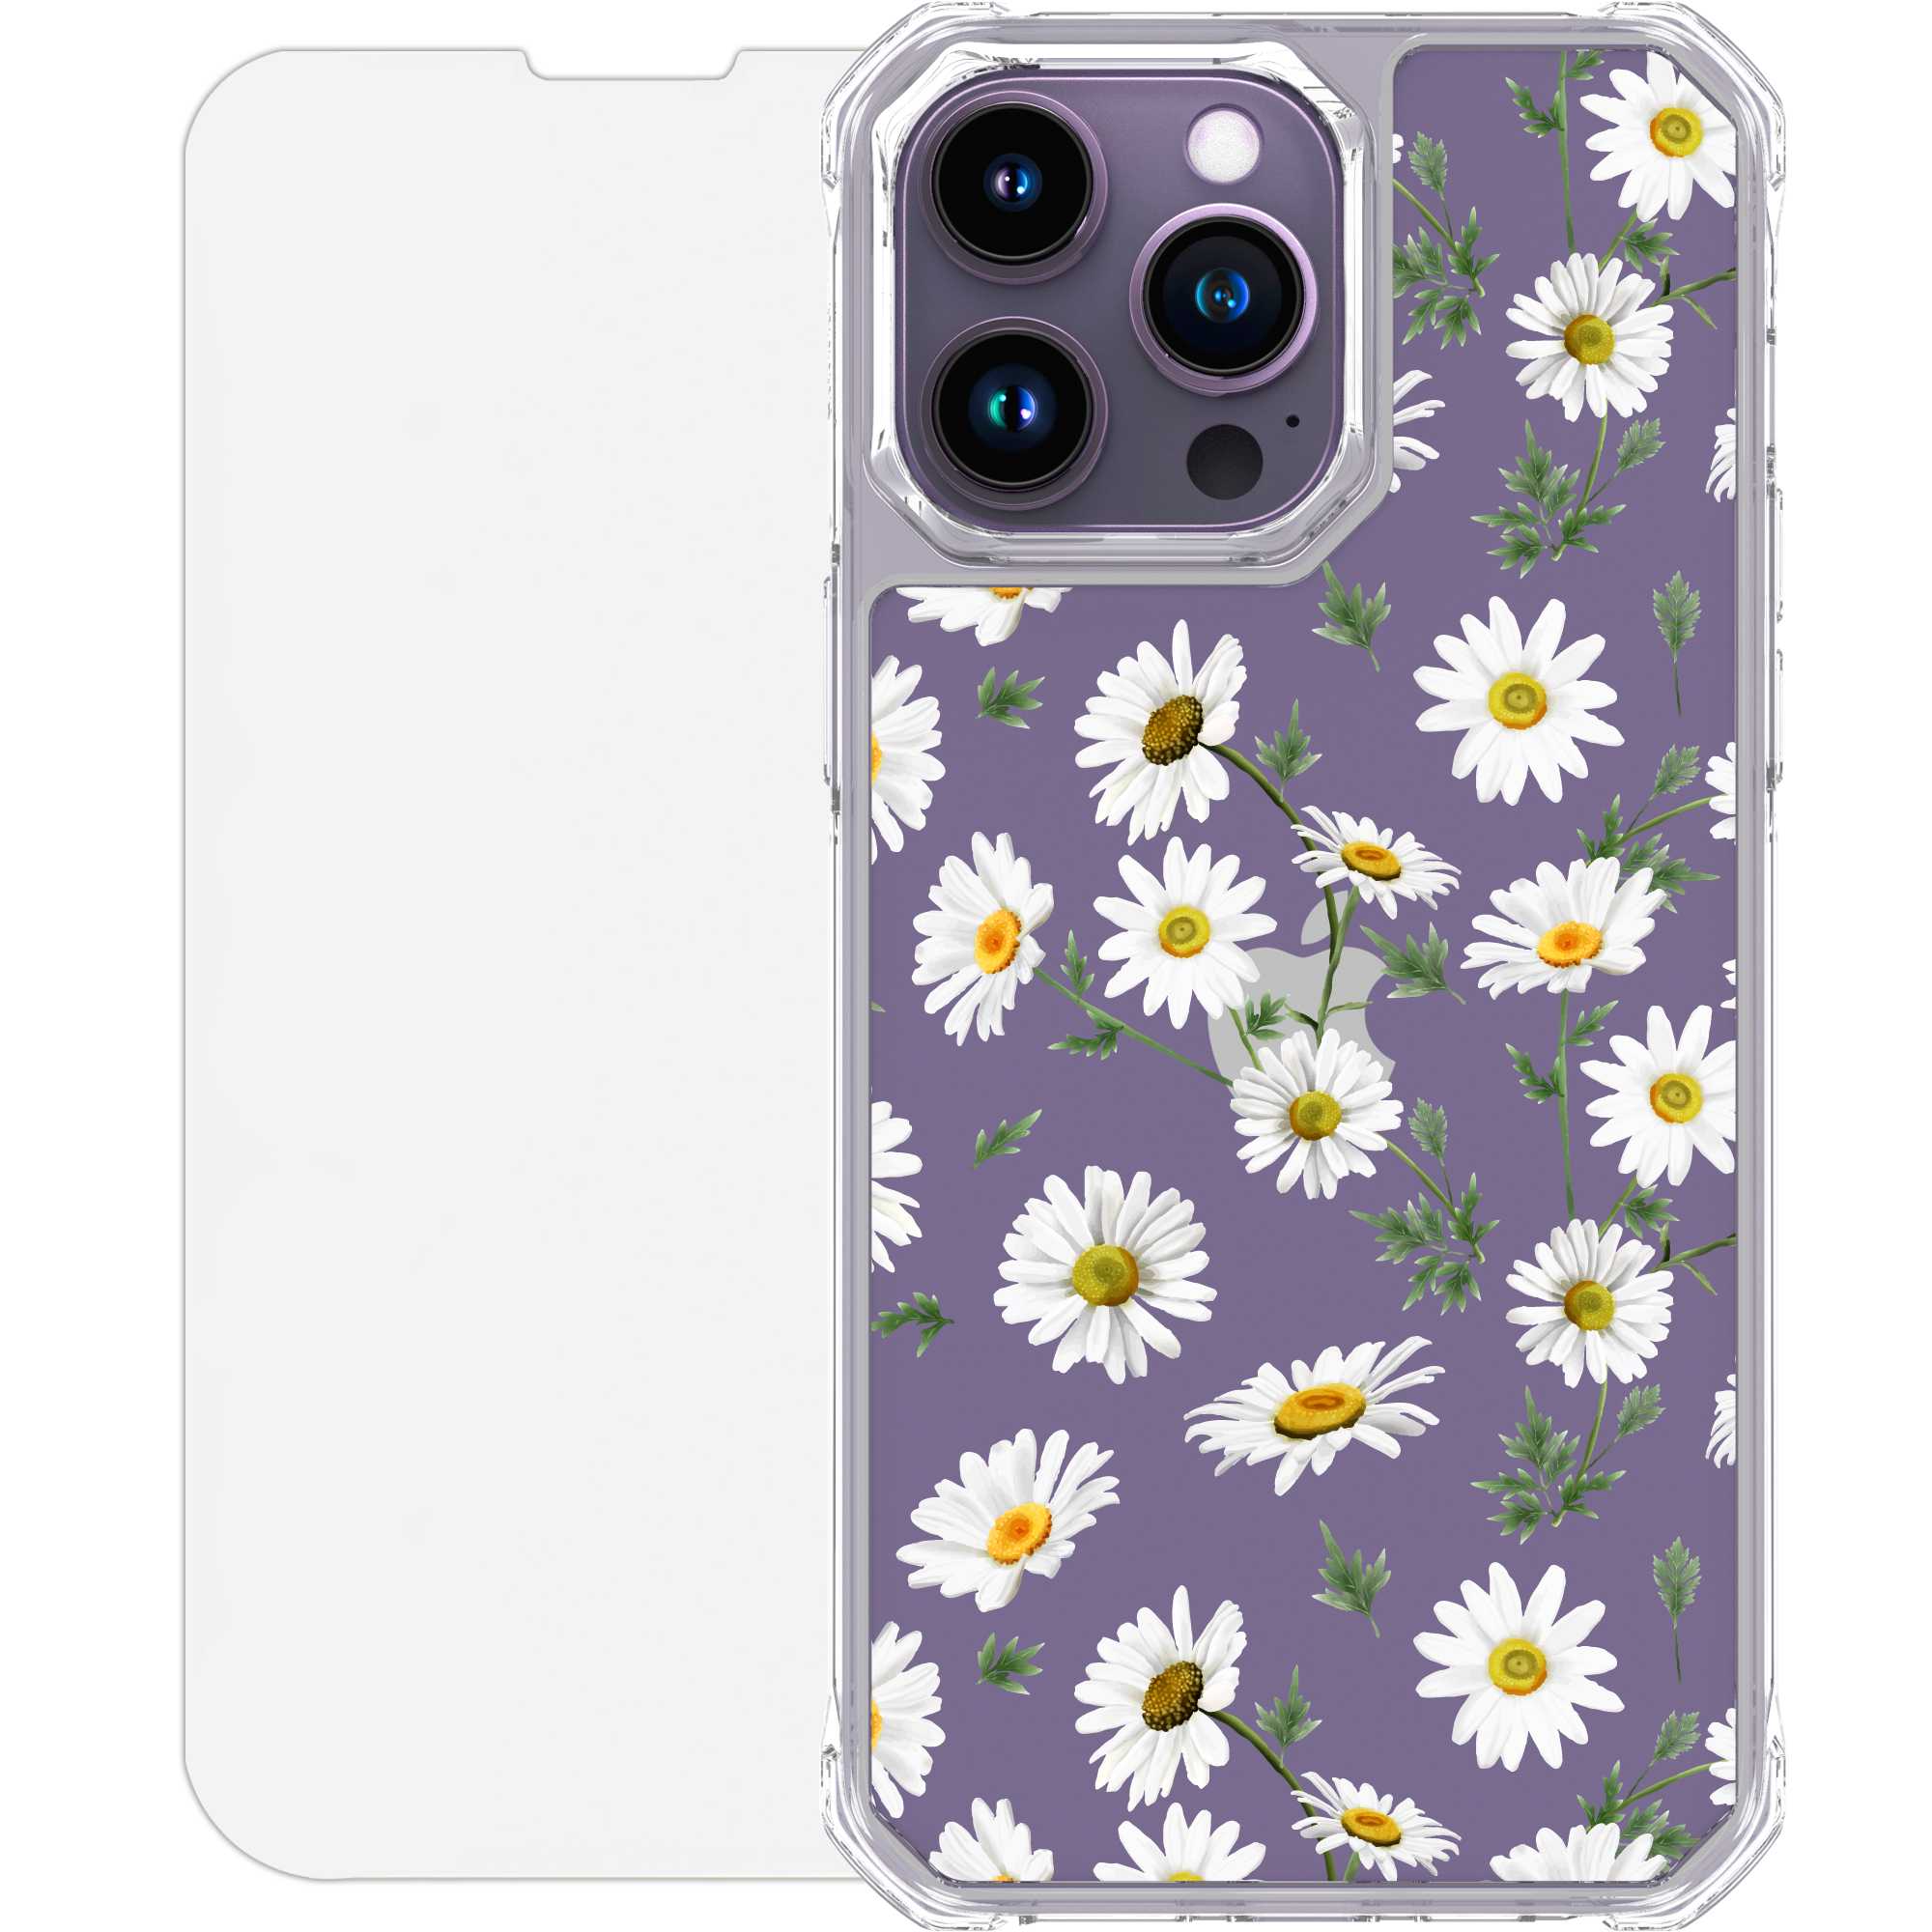 Scooch CrystalCase for iPhone 14 Pro Max Daisies Scooch CrystalCase